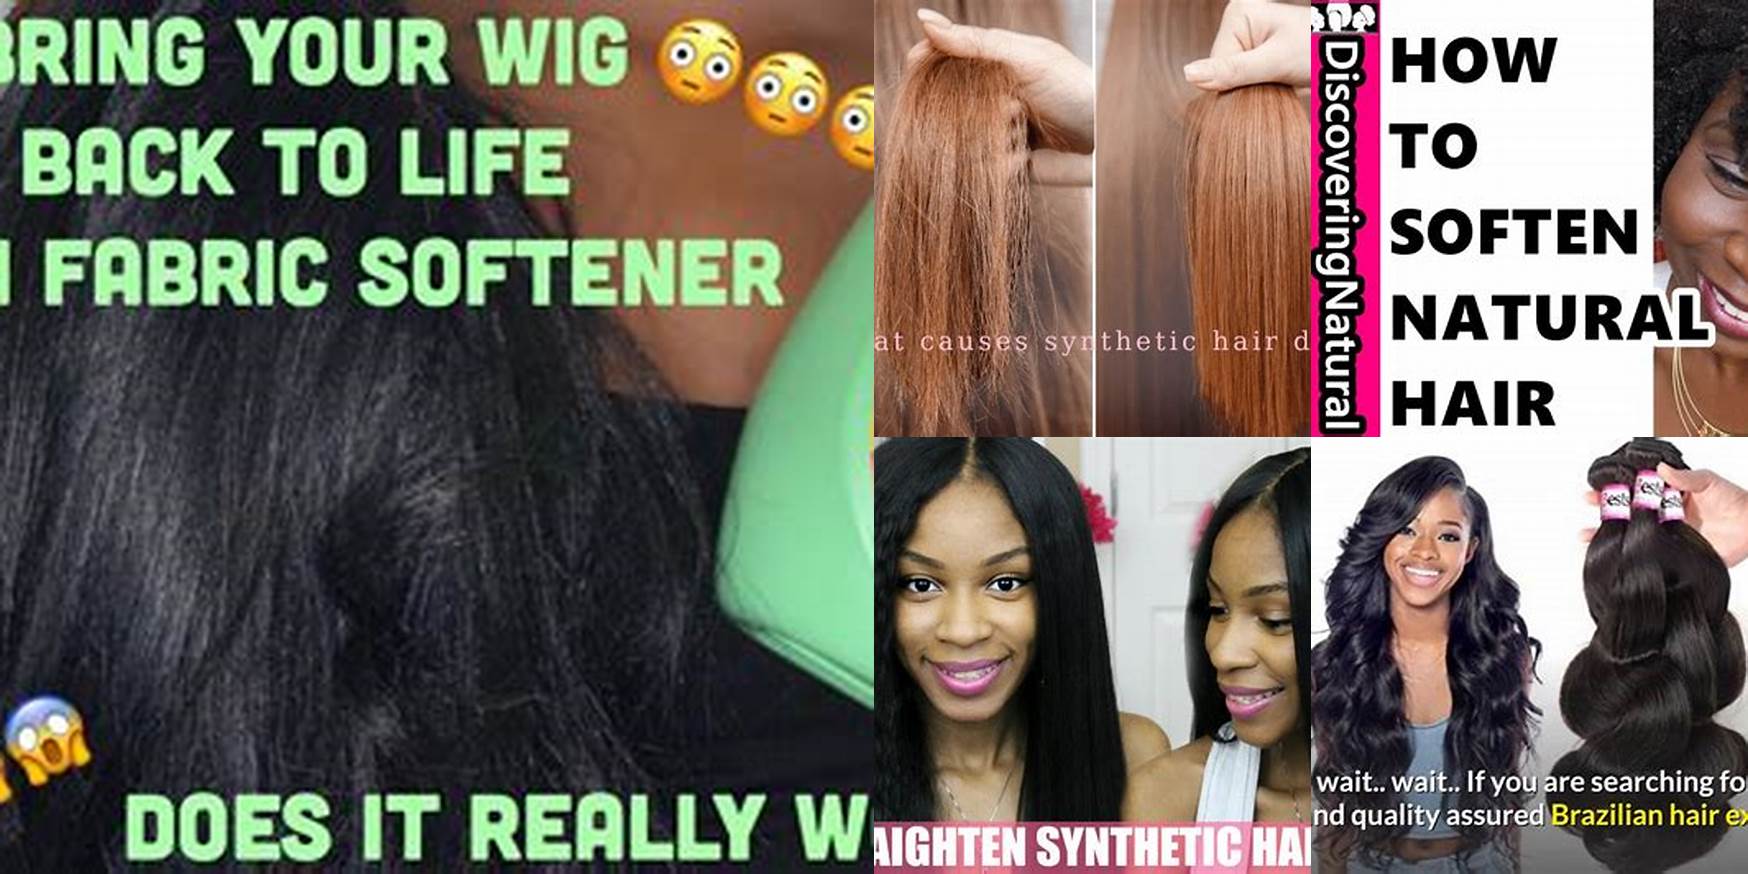 How To Make Synthetic Hair Soft Without Fabric Softener